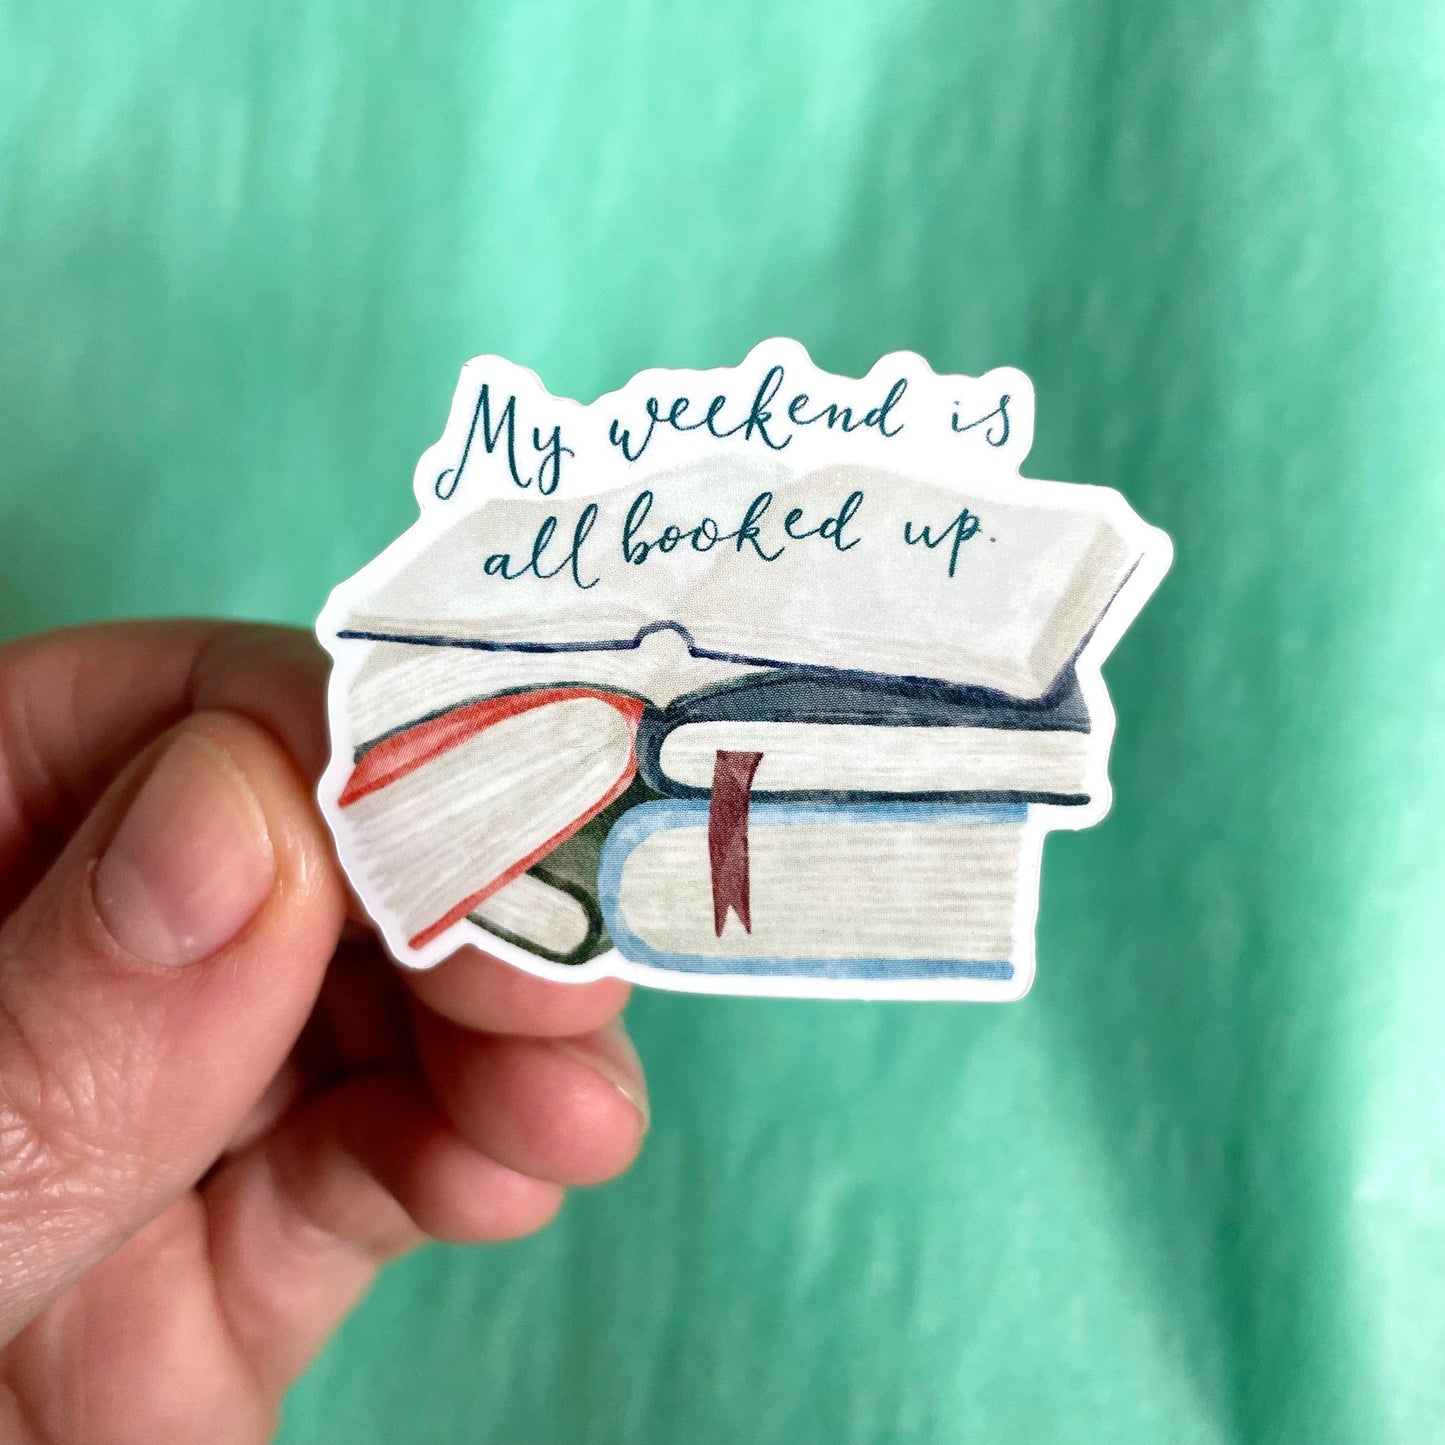 My weekend is all booked up - bookish sticker - vinyl And Hope Designs stickers